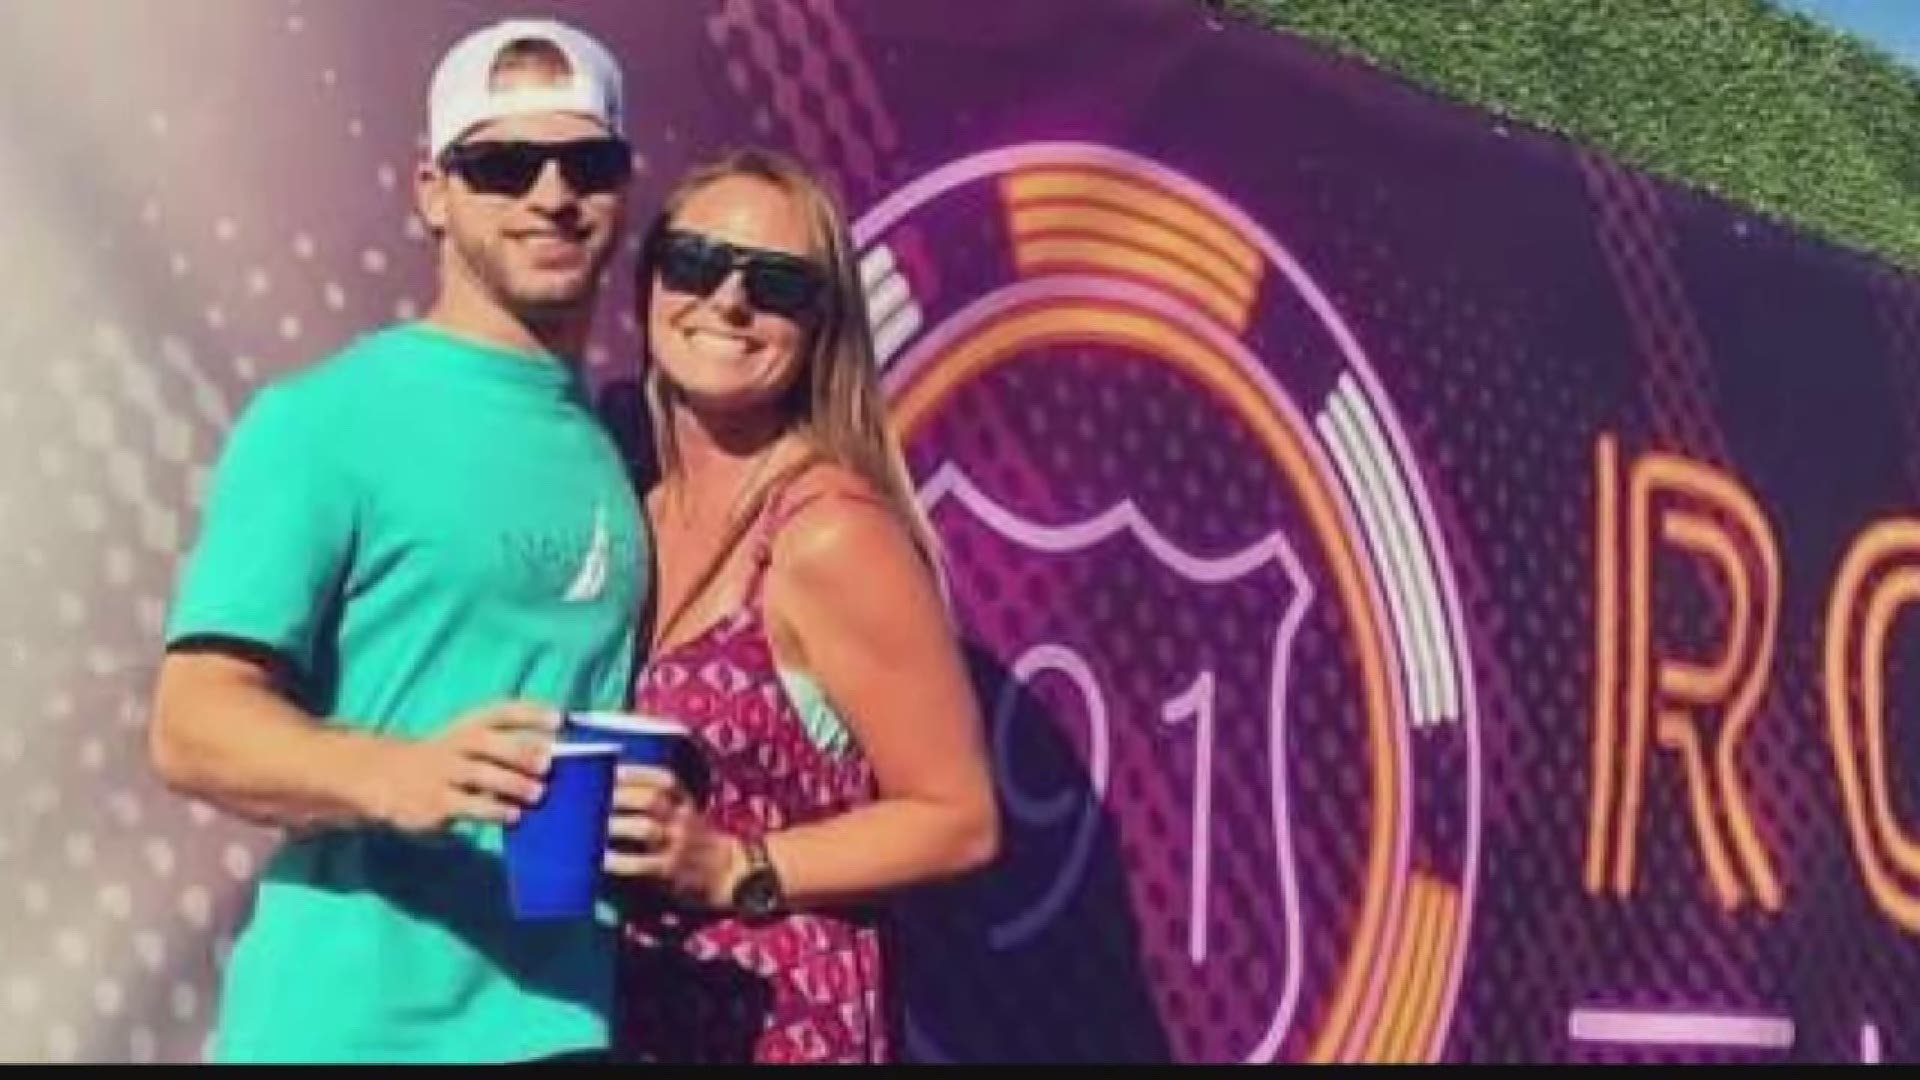 Allison Crute and her boyfriend, Andrew Kampe, both were injured when a gunman opened fire from a hotel room above a packed, outdoor concert in Las Vegas.